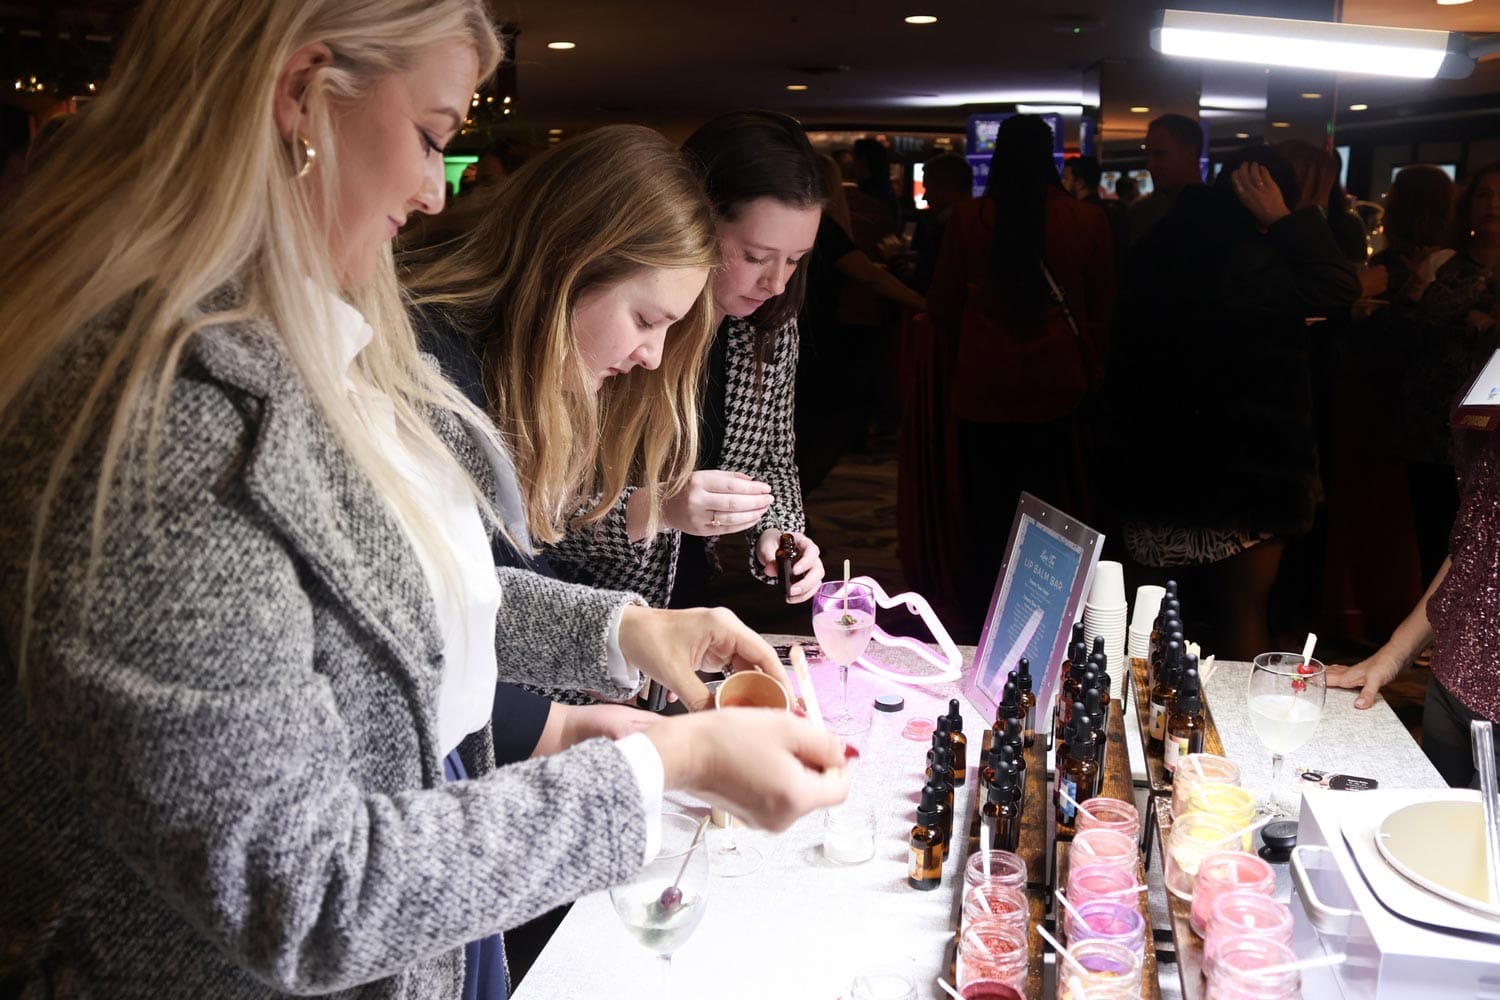 Three women inspecting and selecting products at a display table during an indoor event.